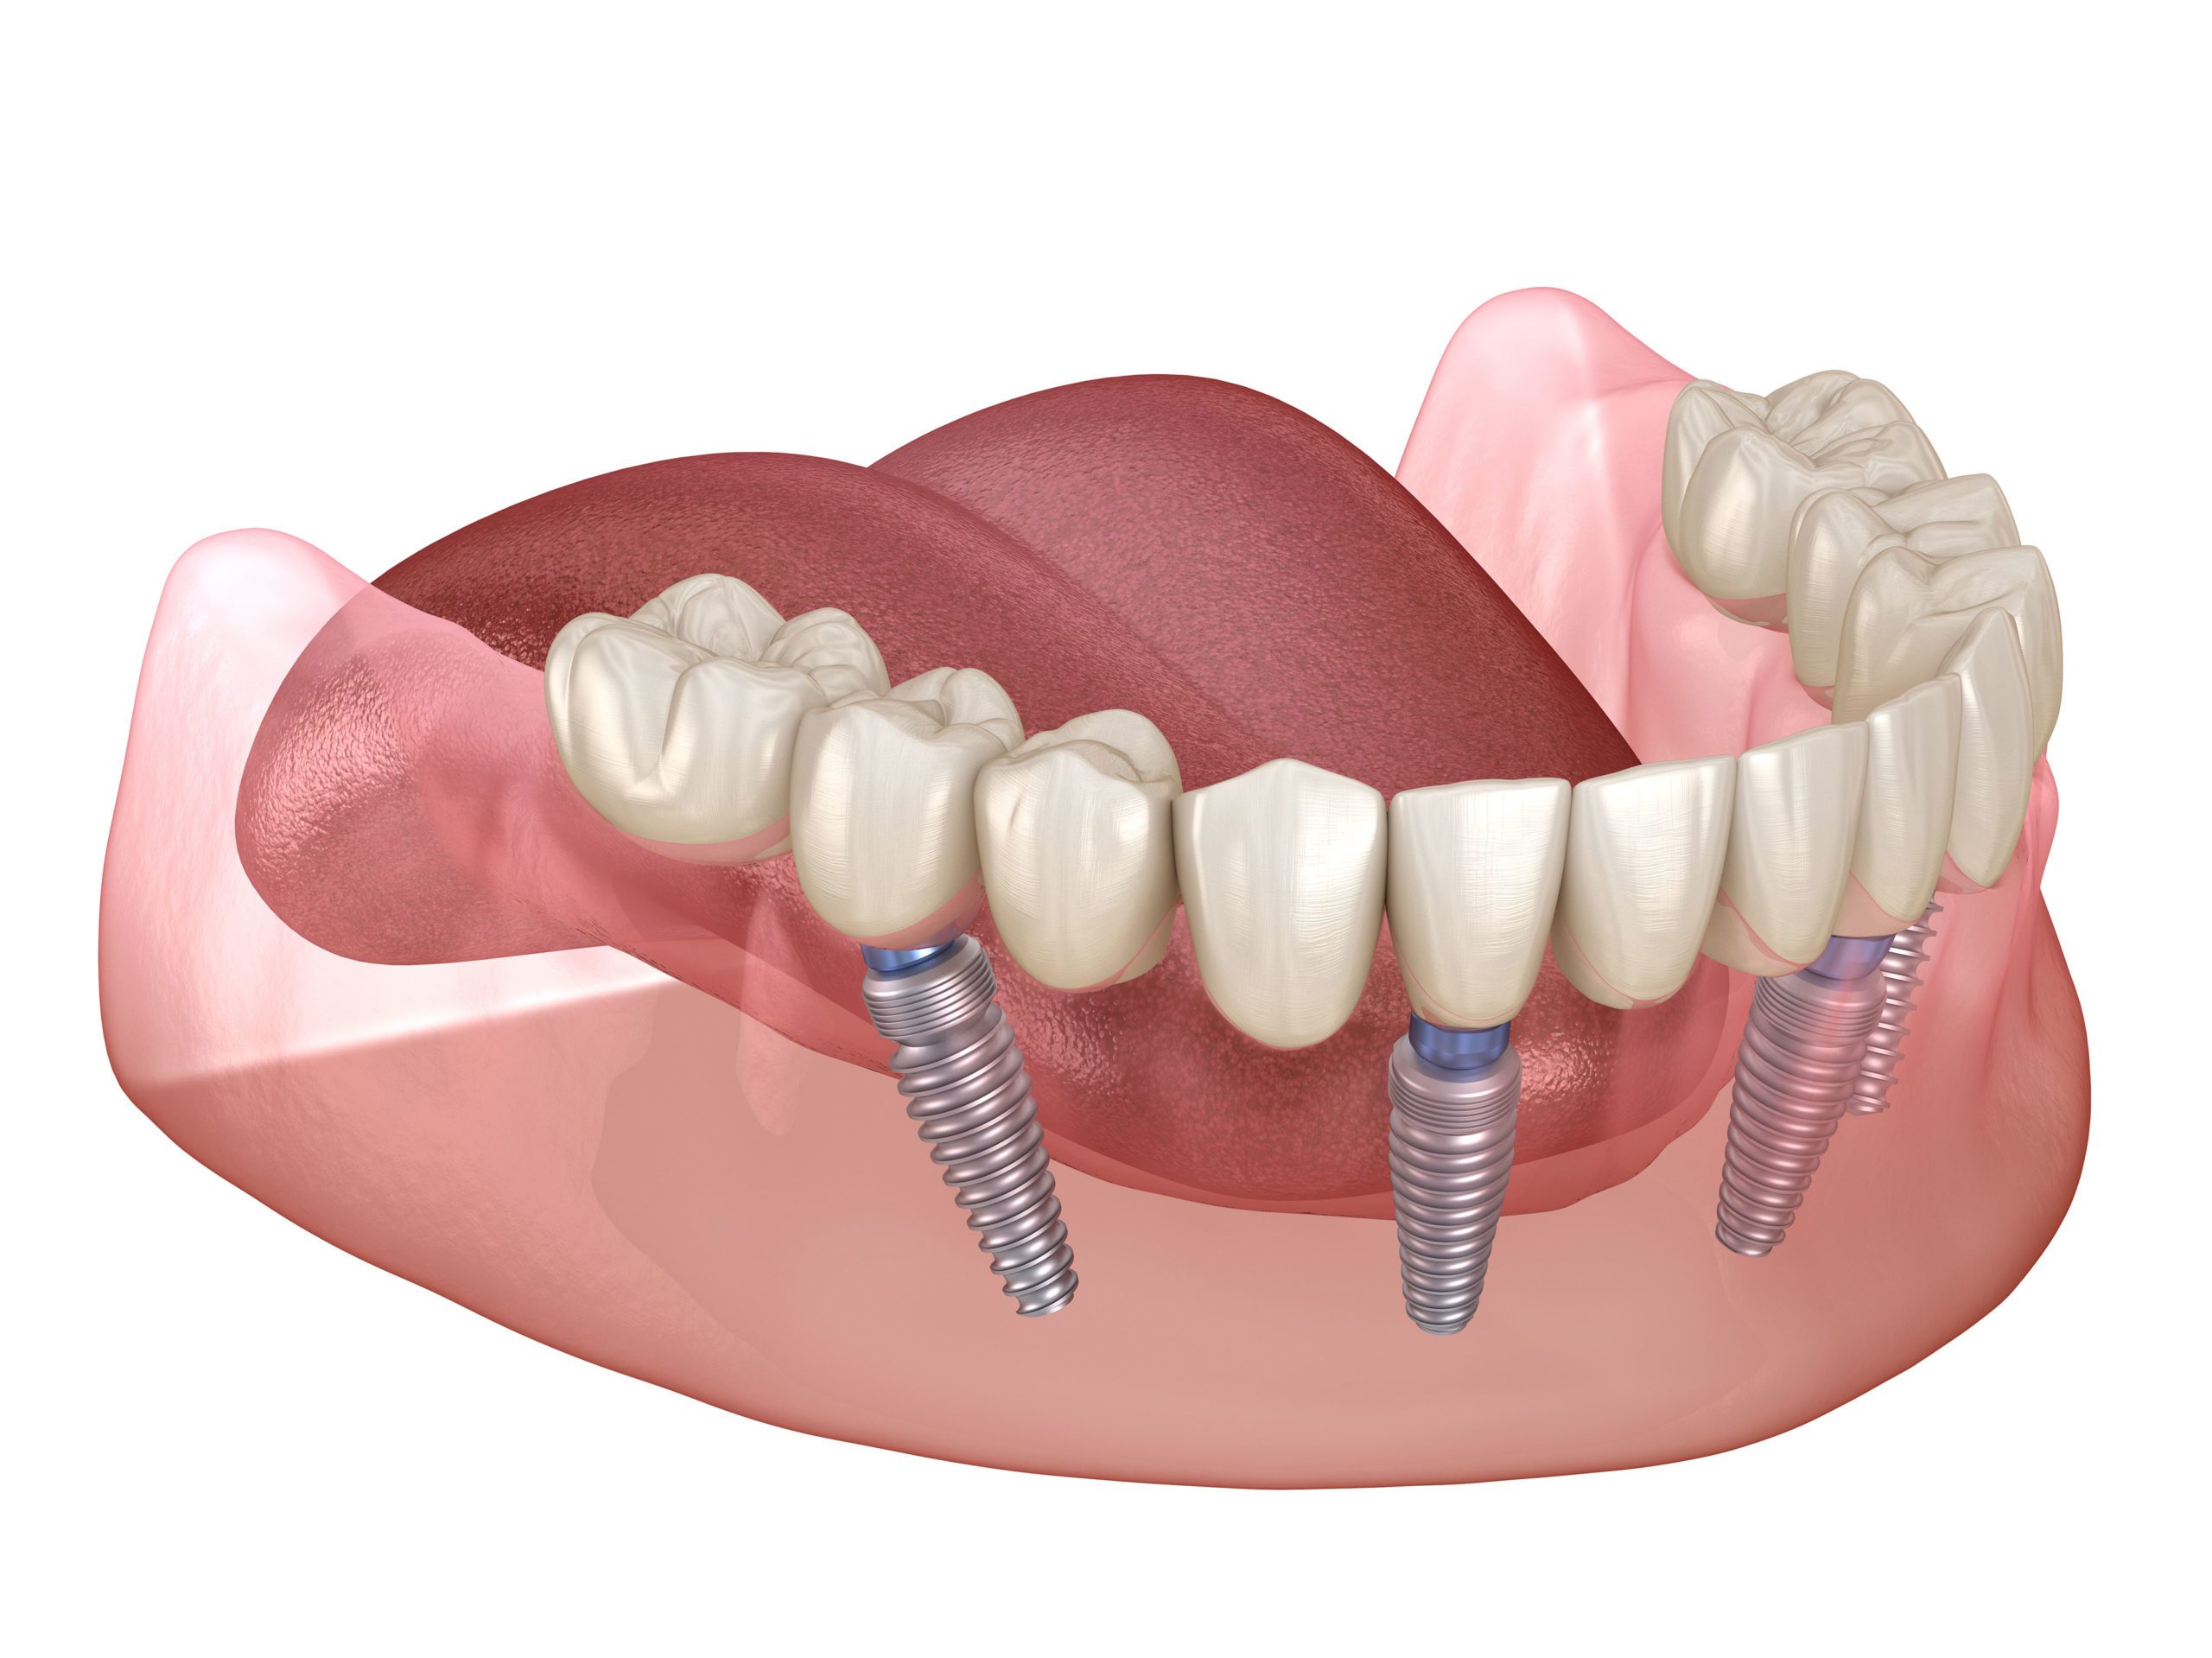 All-On-4 Dental Implants Cost Montreal  